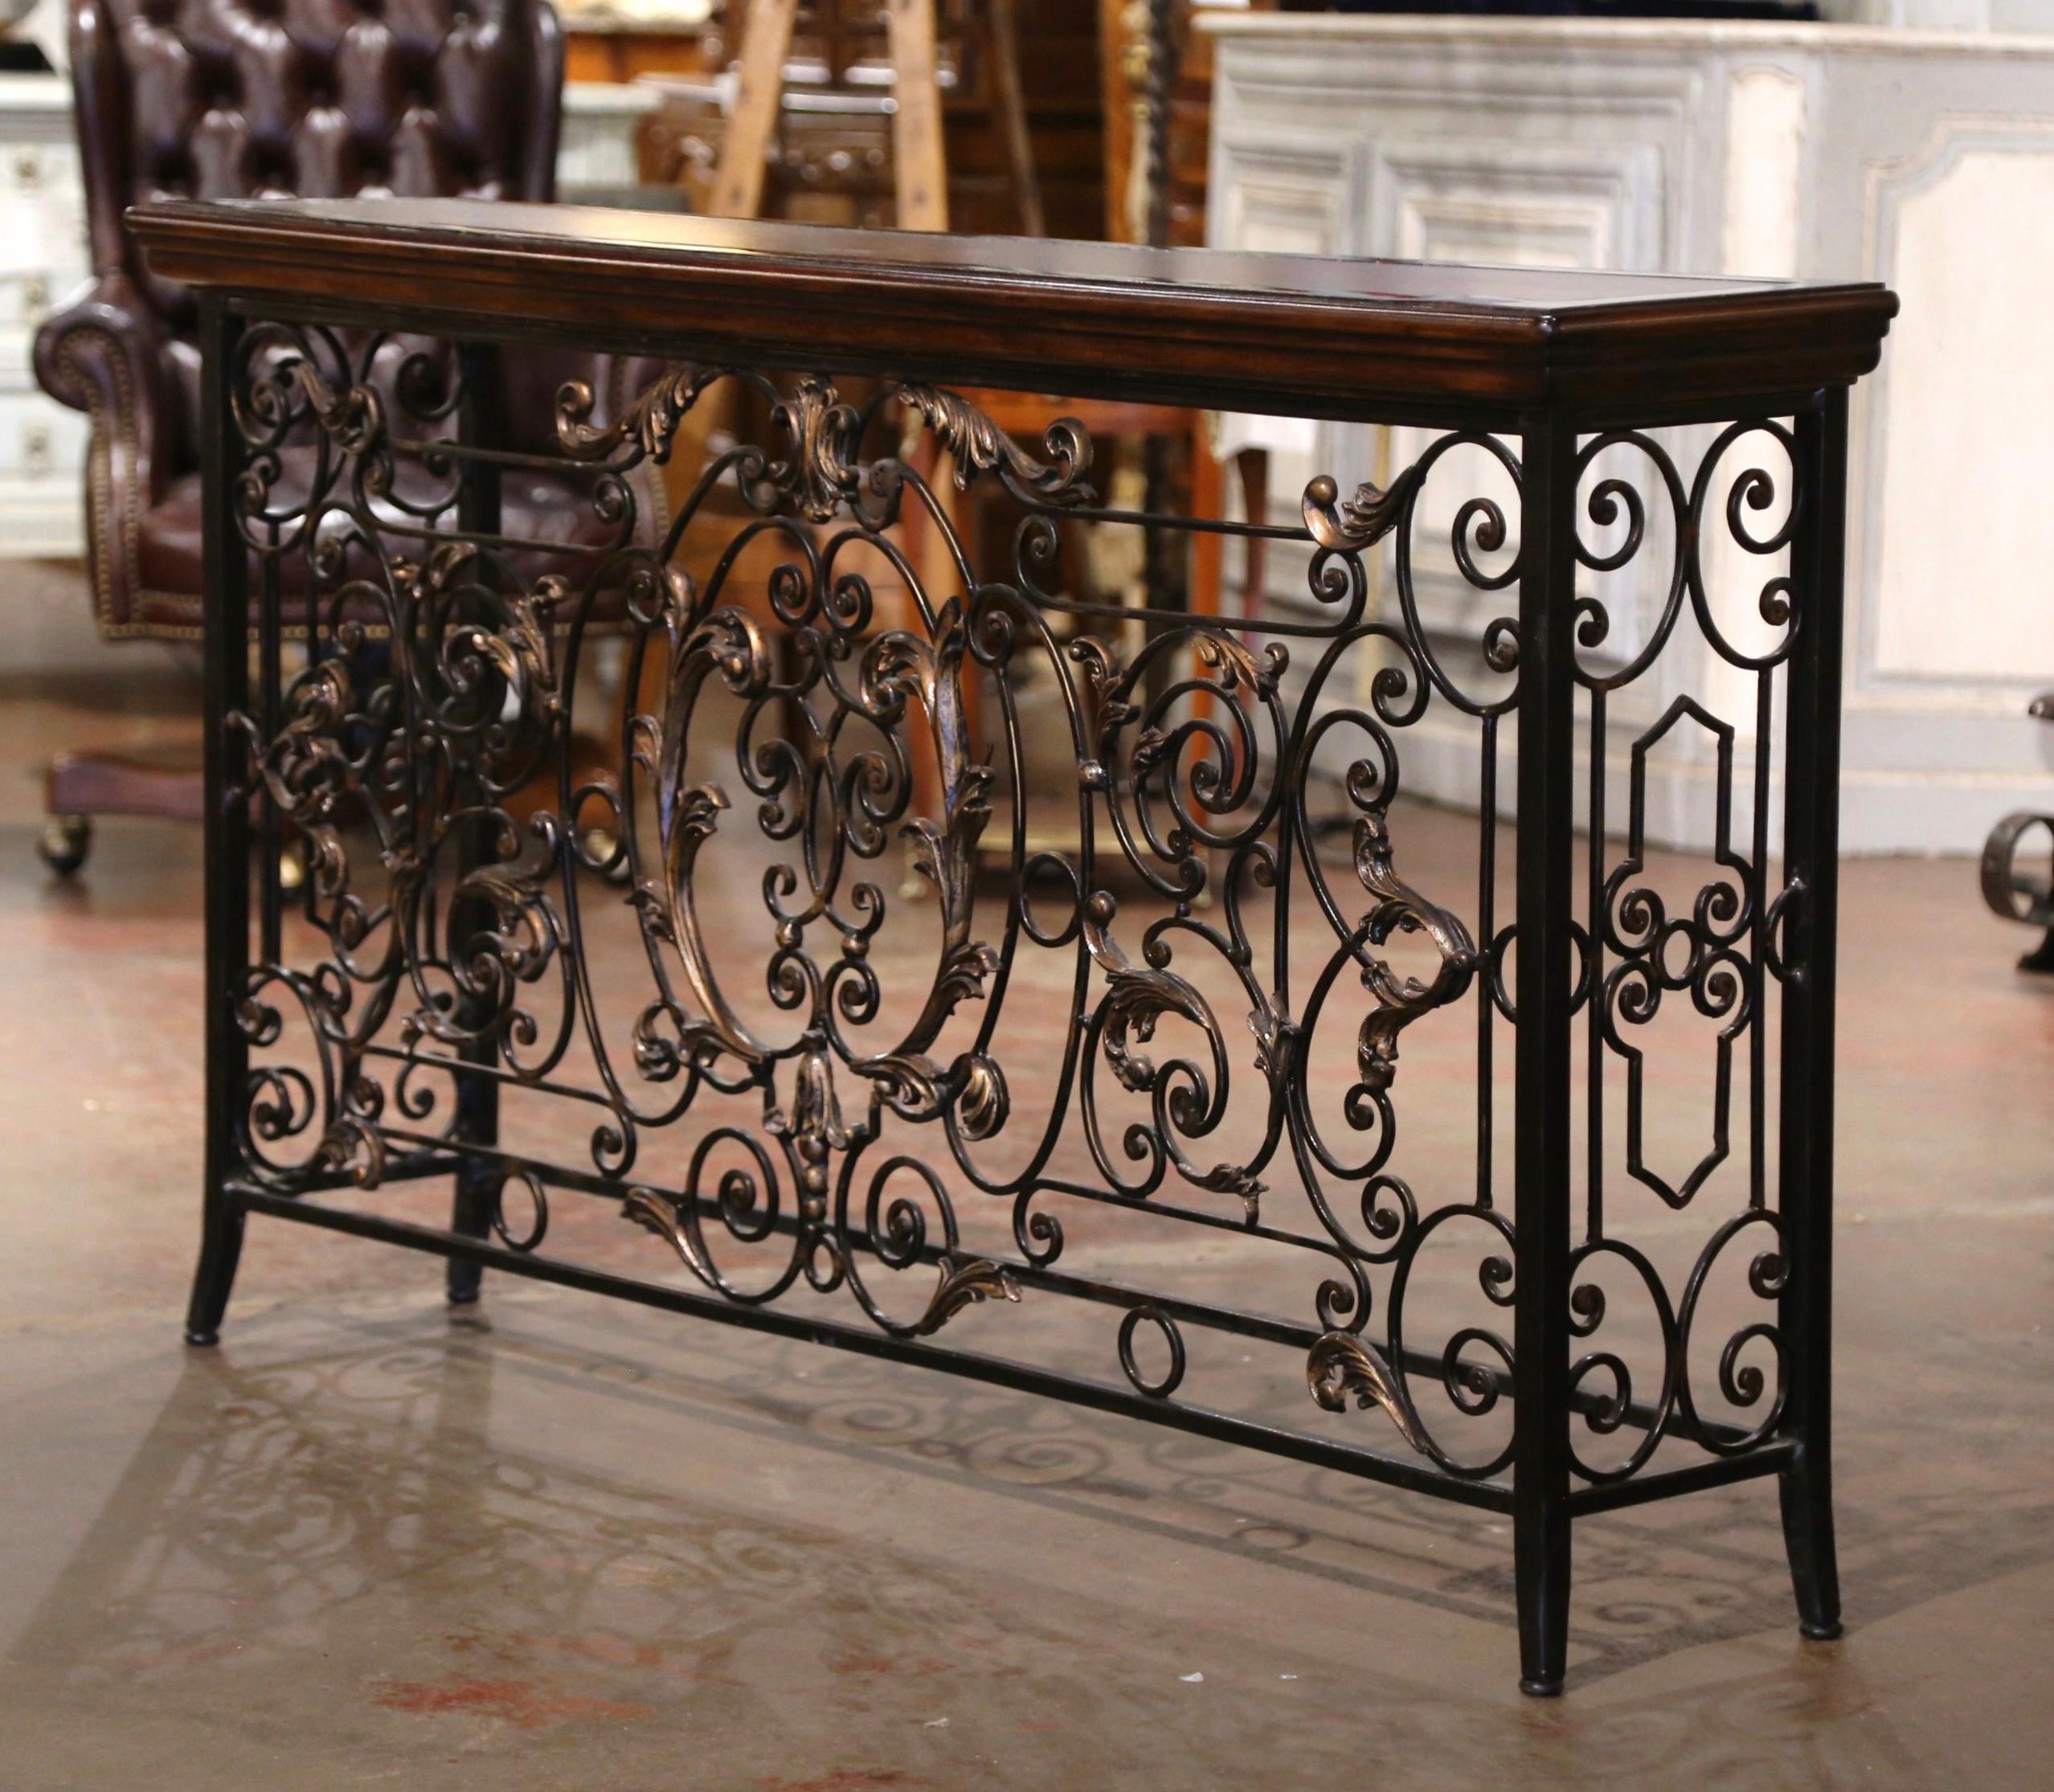 Forged in France circa 1880, the antique console table base stands on curved front legs connected with an all around bottom stretcher. Long and narrow, the Louis XV style table features intricate scrolled decor on all three sides, embellished with a